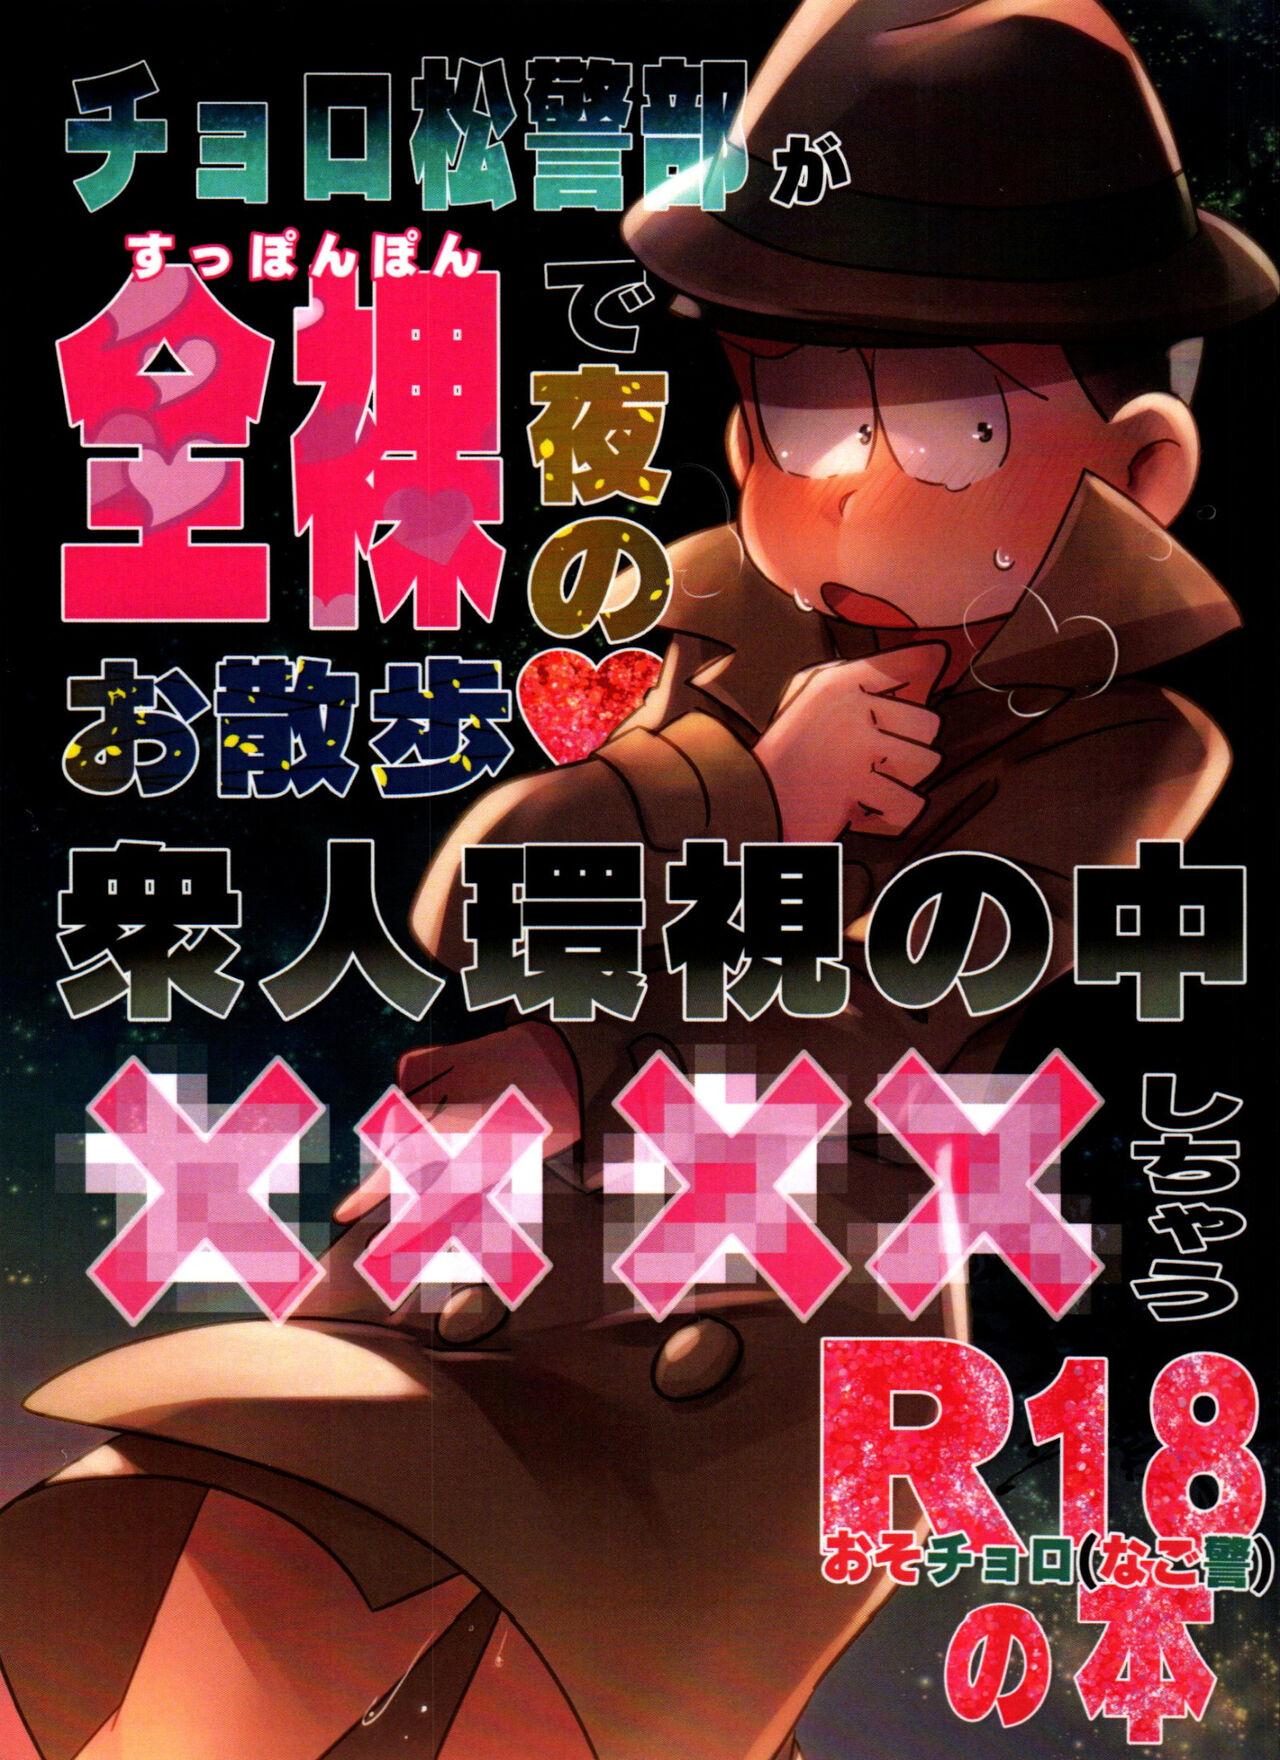 Adult Inspector Choromatsu walks naked at night and does XXX in the public eye R18 book - Osomatsu san Seduction Porn - Picture 1